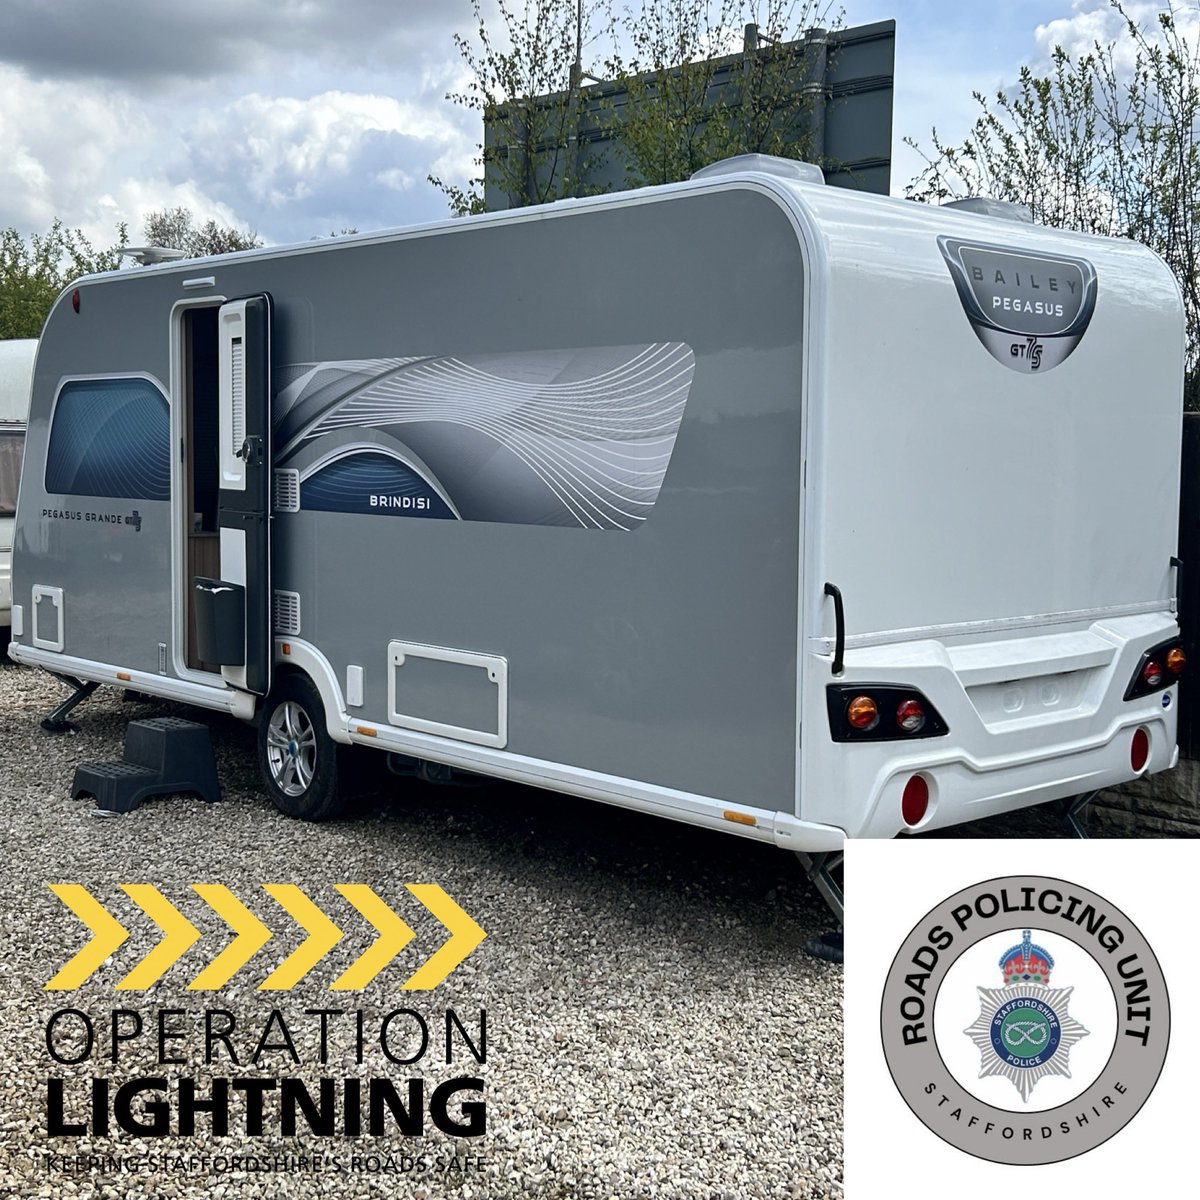 This £30,000 caravan was reported #stolen at 9am this morning to @cheshirepolice @Tracker_UK activated and intercepted by the RPU in @TamworthPolice area Vehicle recovered to its owner who is more than Happy 👌 #OpLightning #TrackerUk #RPU